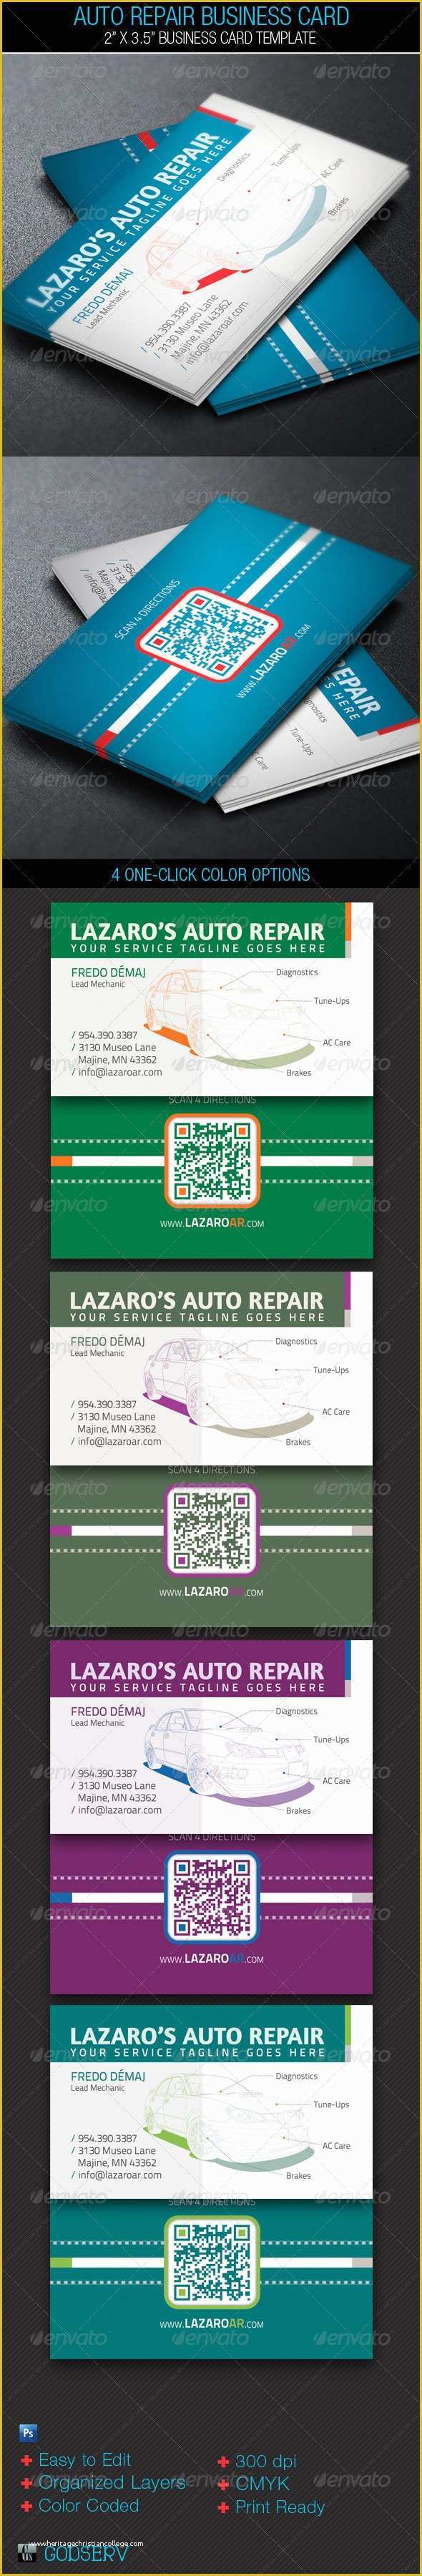 Auto Repair Business Card Templates Free Of Auto Repair Service Business Card Template On Behance